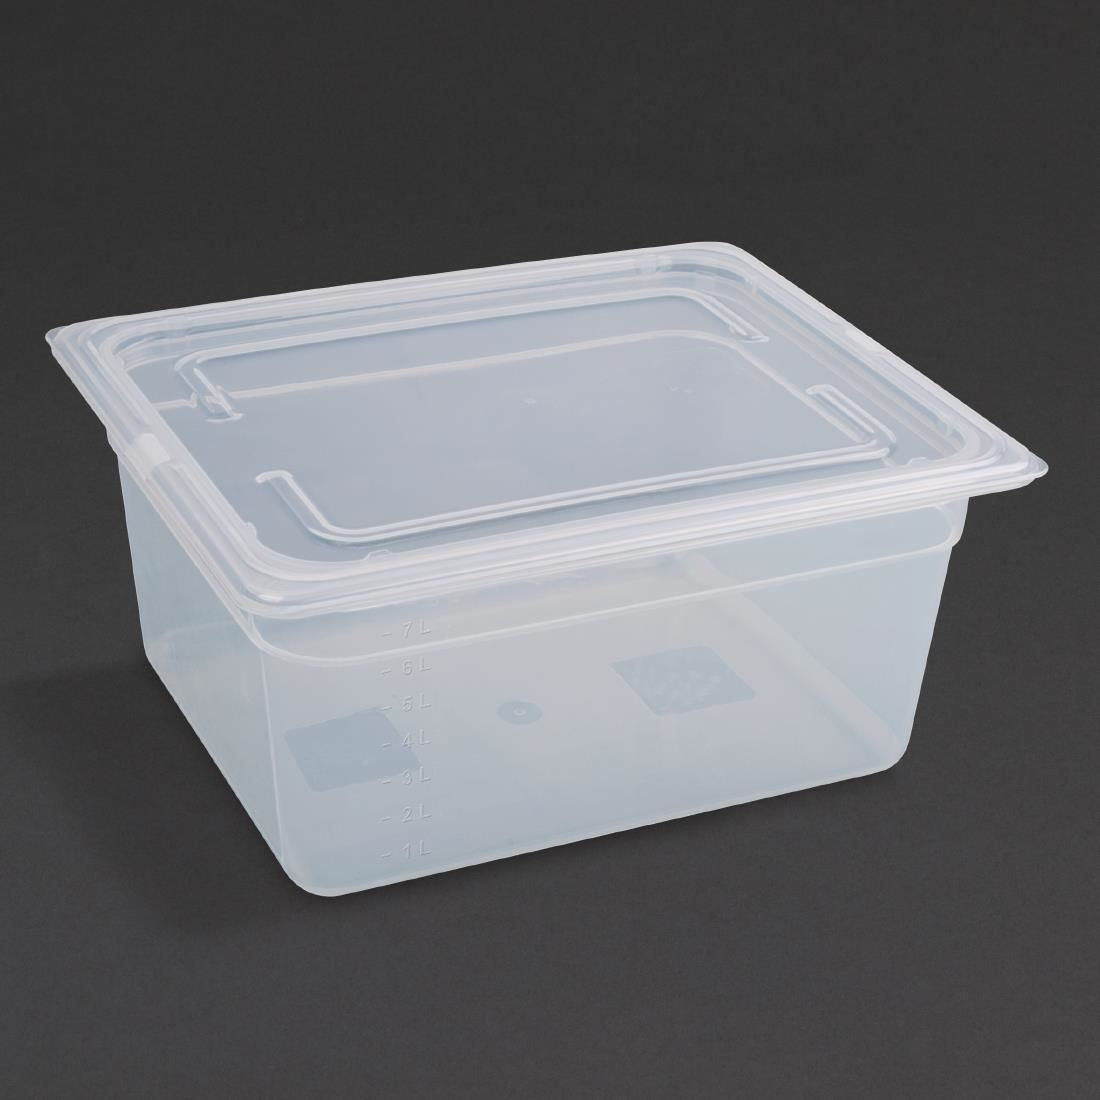 GJ516 Vogue Polypropylene 1/2 Gastronorm Container with Lid 150mm (Pack of 4) JD Catering Equipment Solutions Ltd